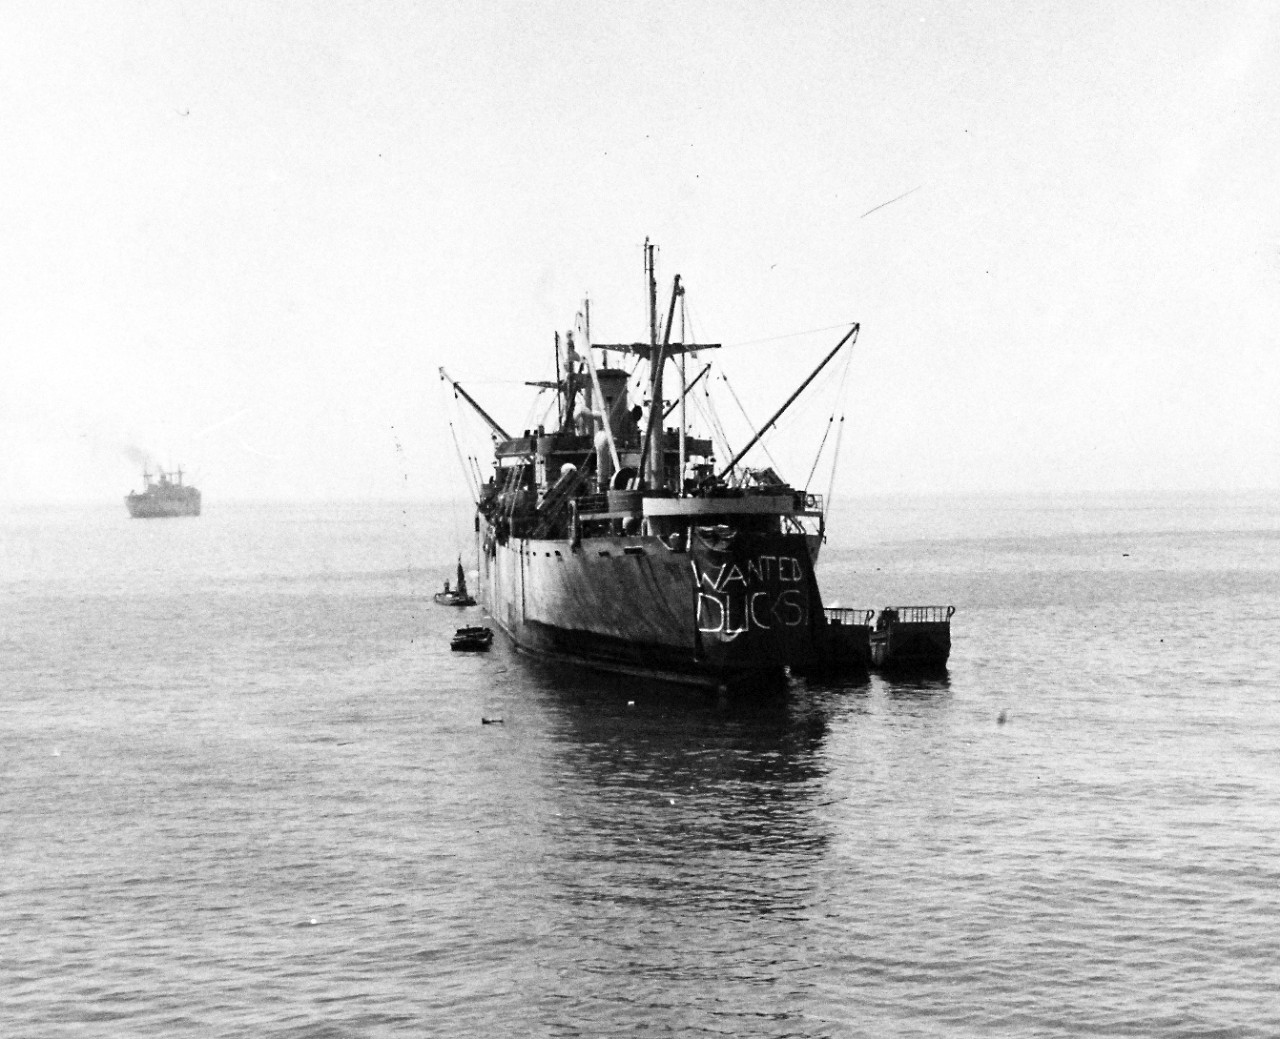 80-G-86223:  Operation Husky, July-August 1943.  Liberty ship in Gela Harbor unloading into LCM’s during the invasion of Sicily.    Note the sign that reads, “Wanted Ducks”.   Photograph received July 15, 1943.      U.S. Navy Photograph, now in the collections of the National Archives.  (2017/01/17).